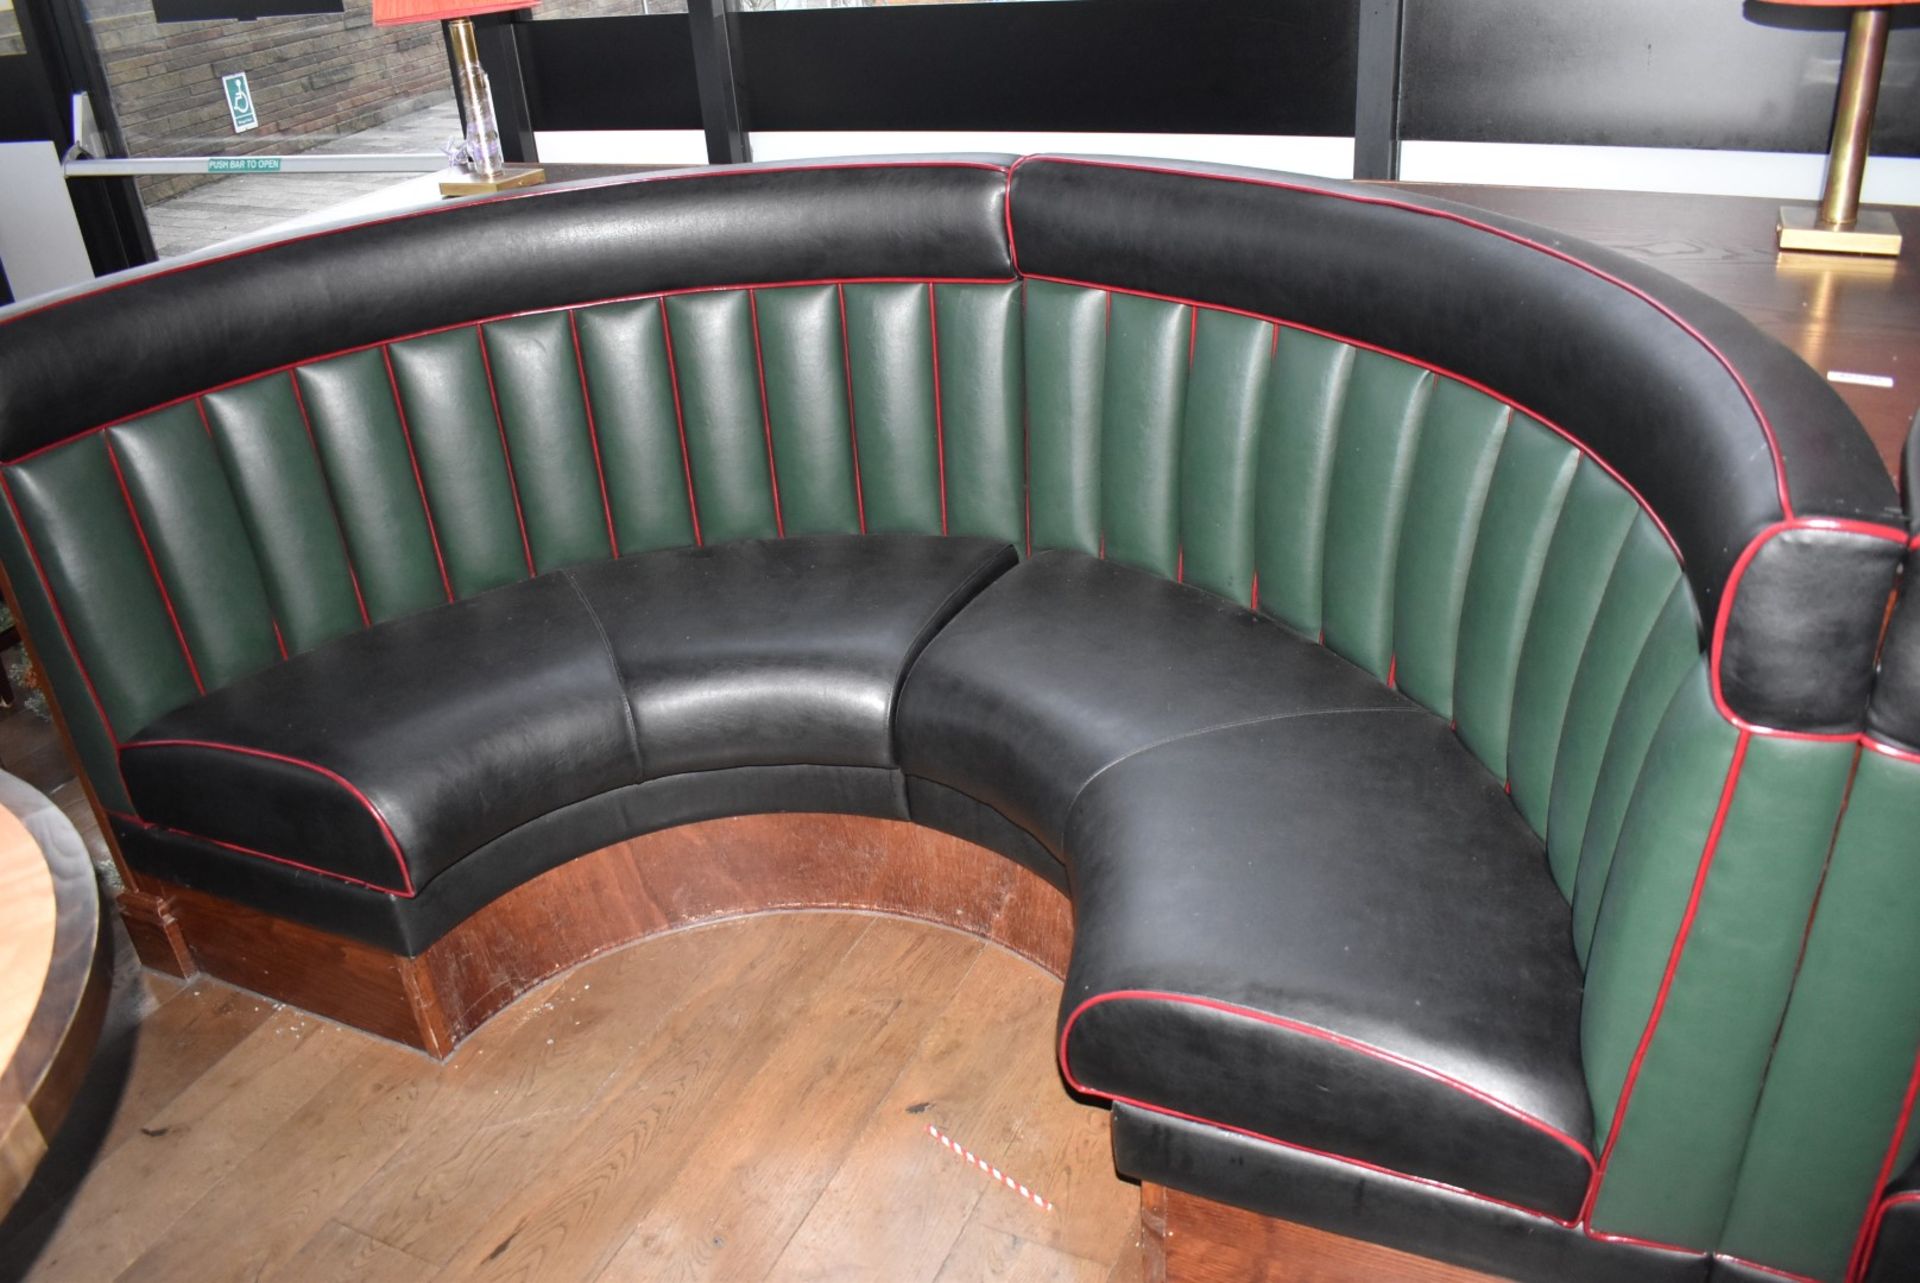 2 x Restaurant C-Shape 4 Person Seating Booth - Green and Black Vertical Fluted Back Upholstery - Image 9 of 13